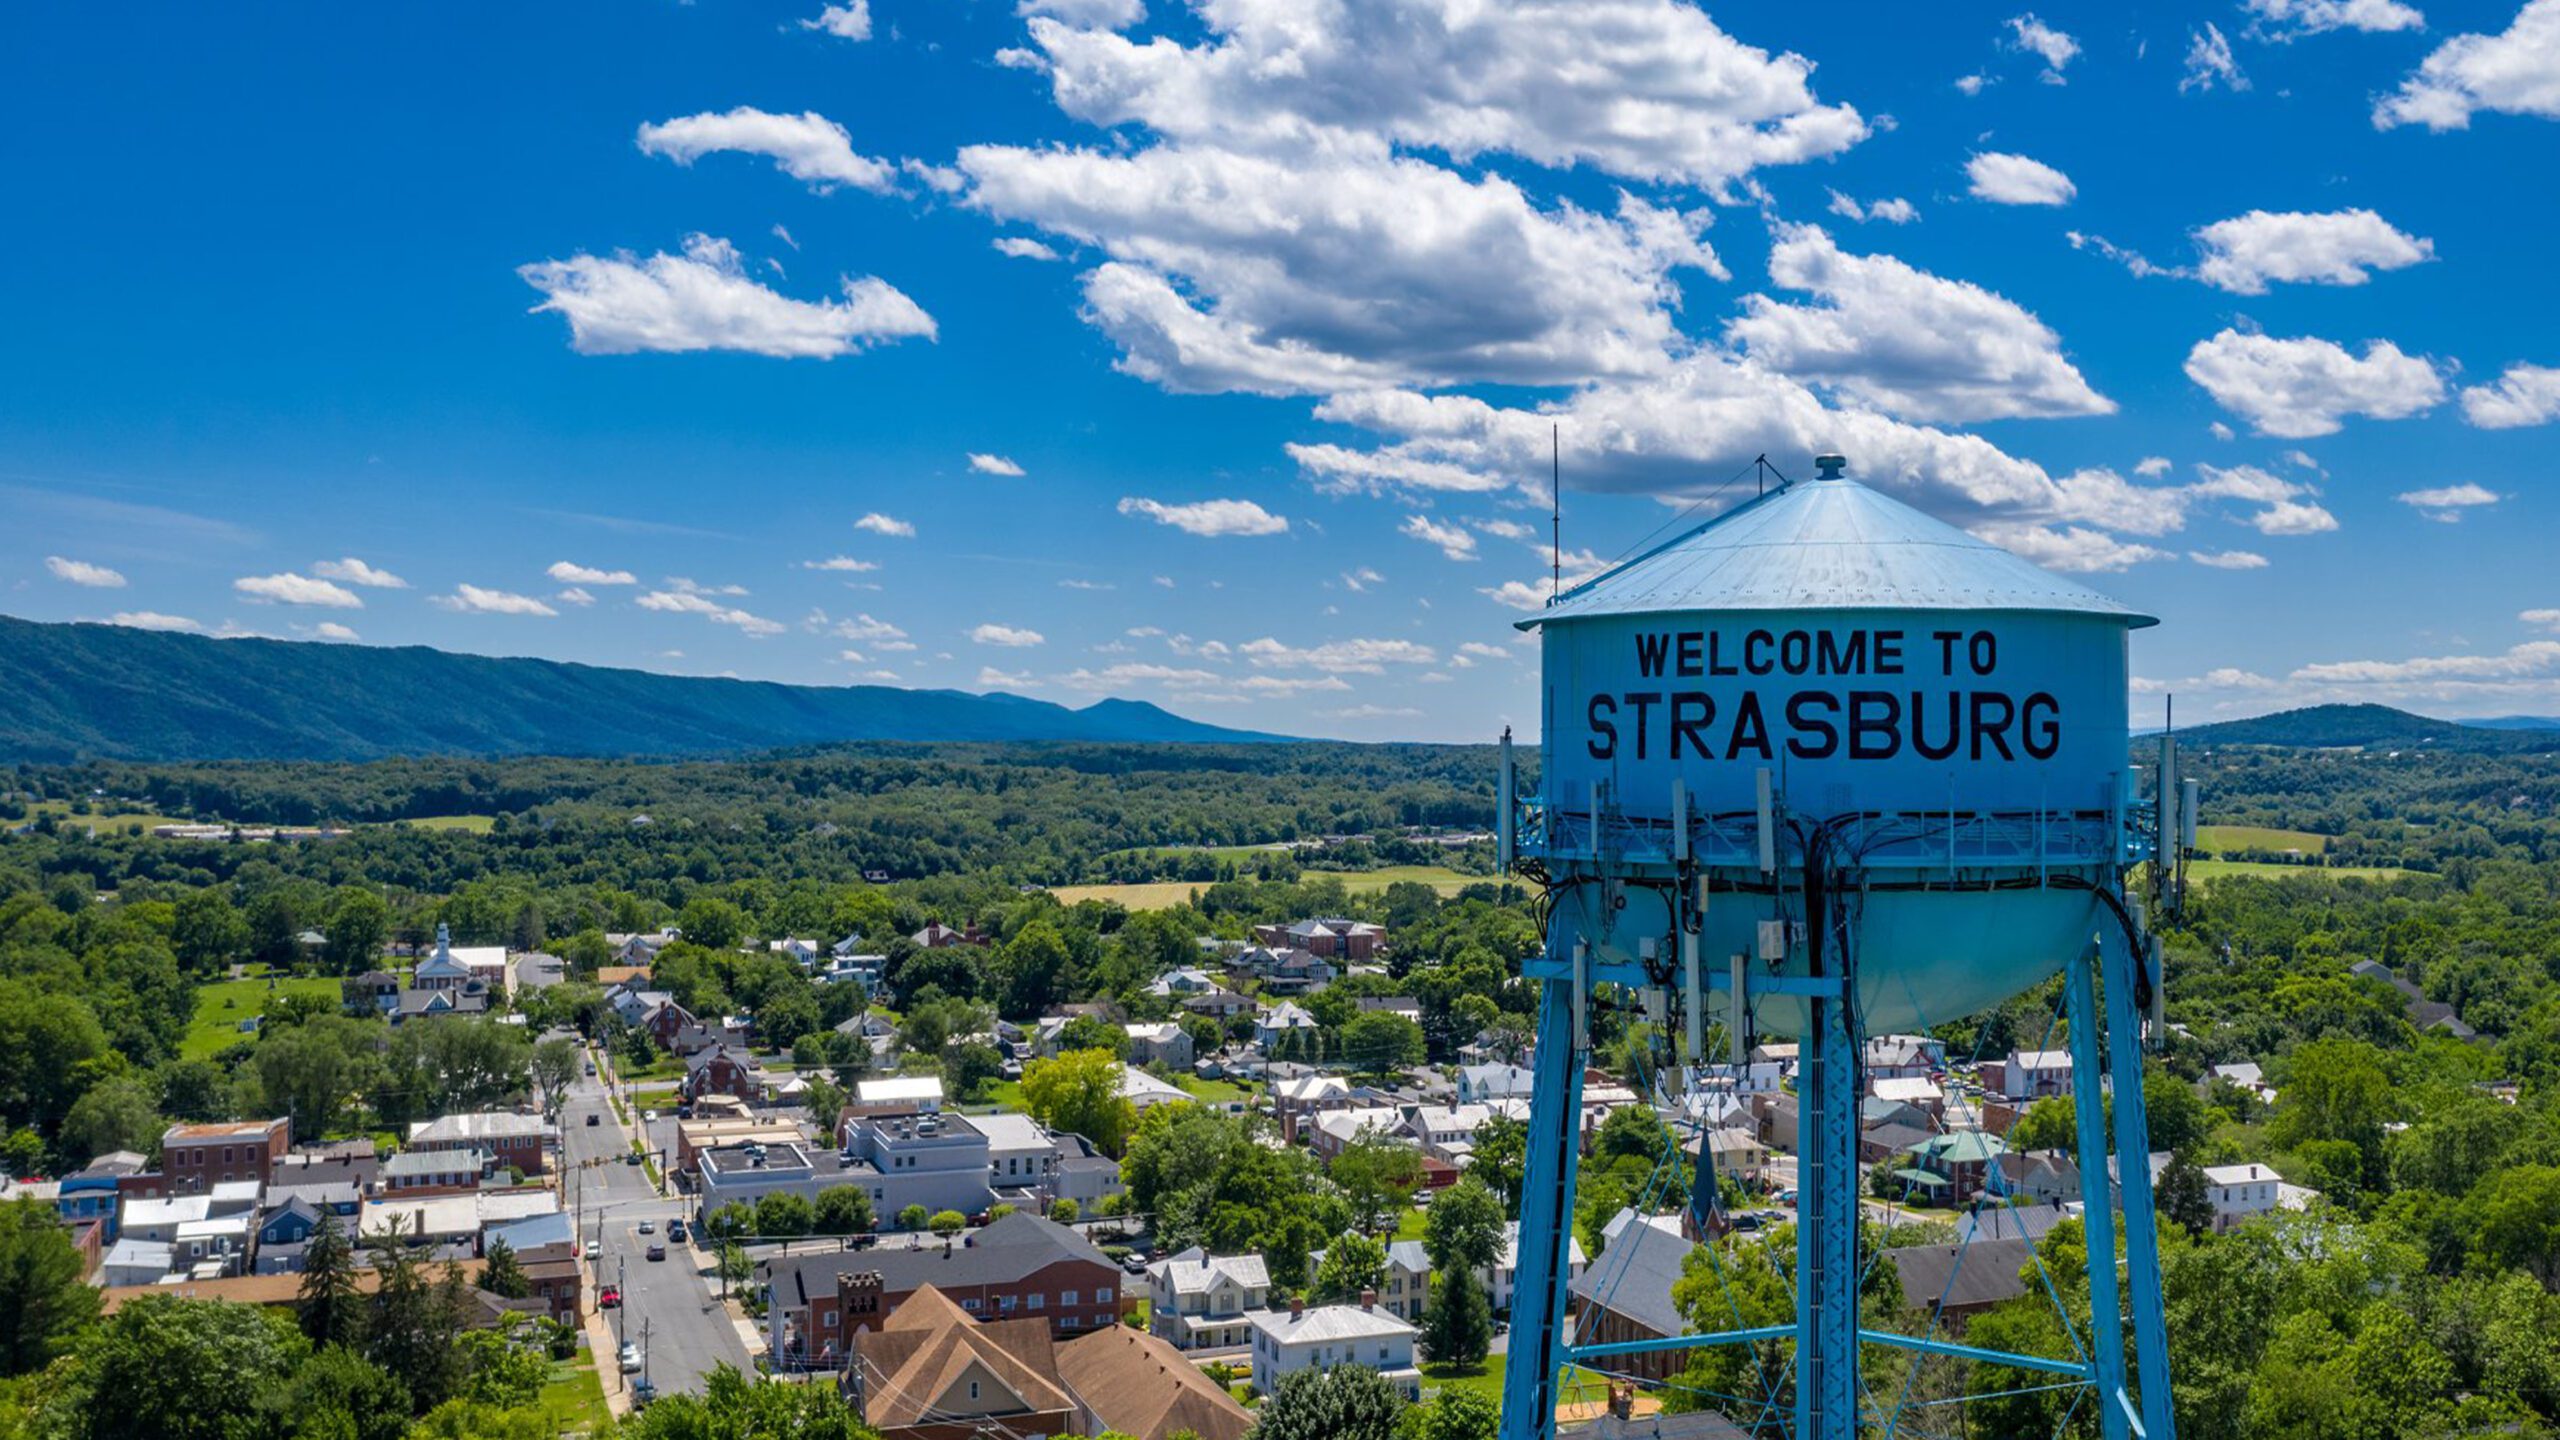 Comcast Services Now Available to More Than 3,300 Homes and Businesses in Strasburg, VA